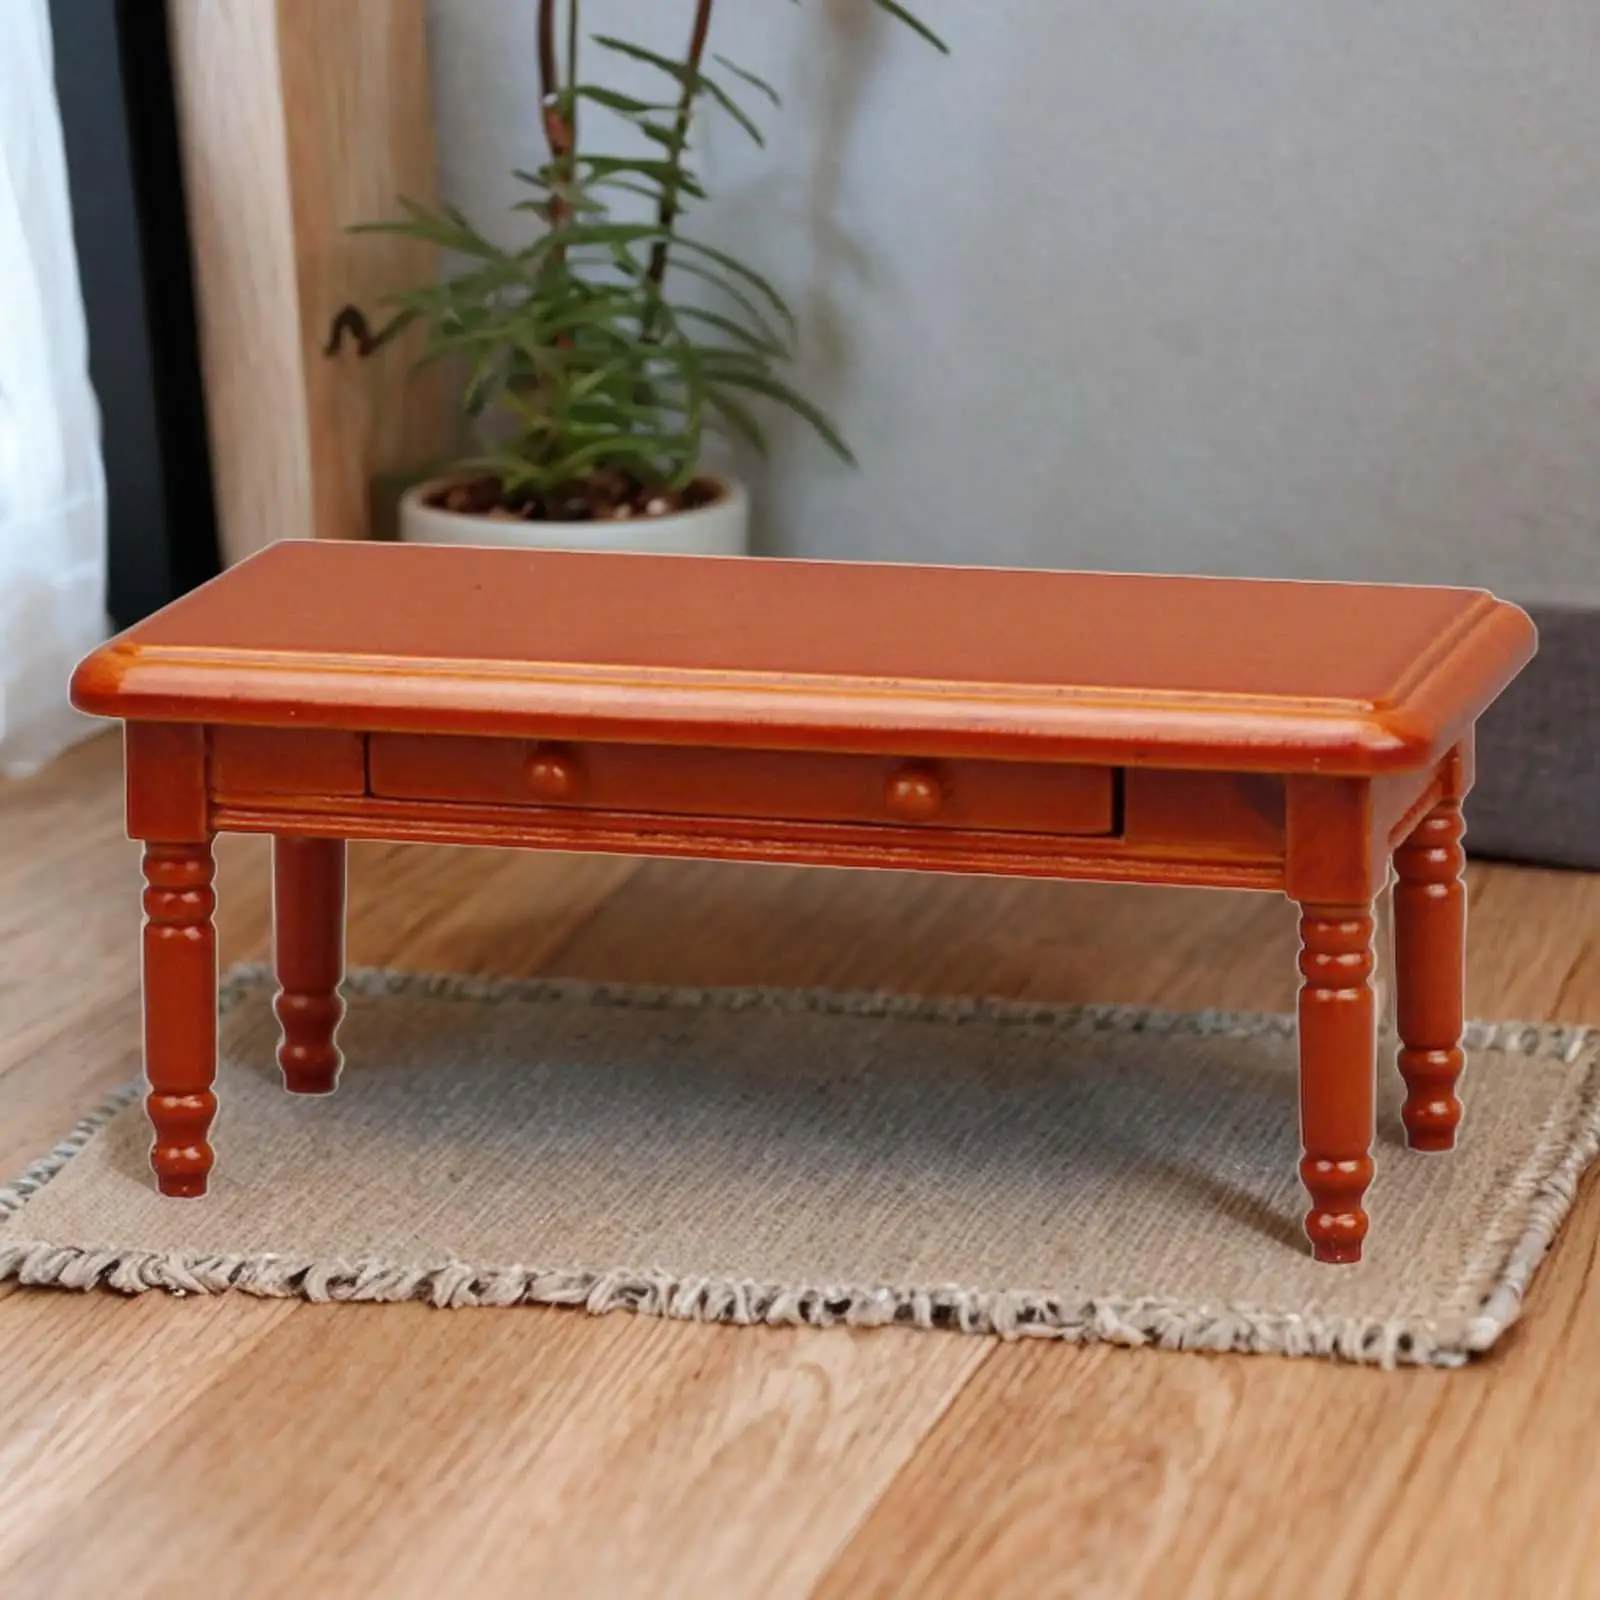 Wooden 1:12 Dollhouse Miniature Model Desk Table with Drawer for Living Room